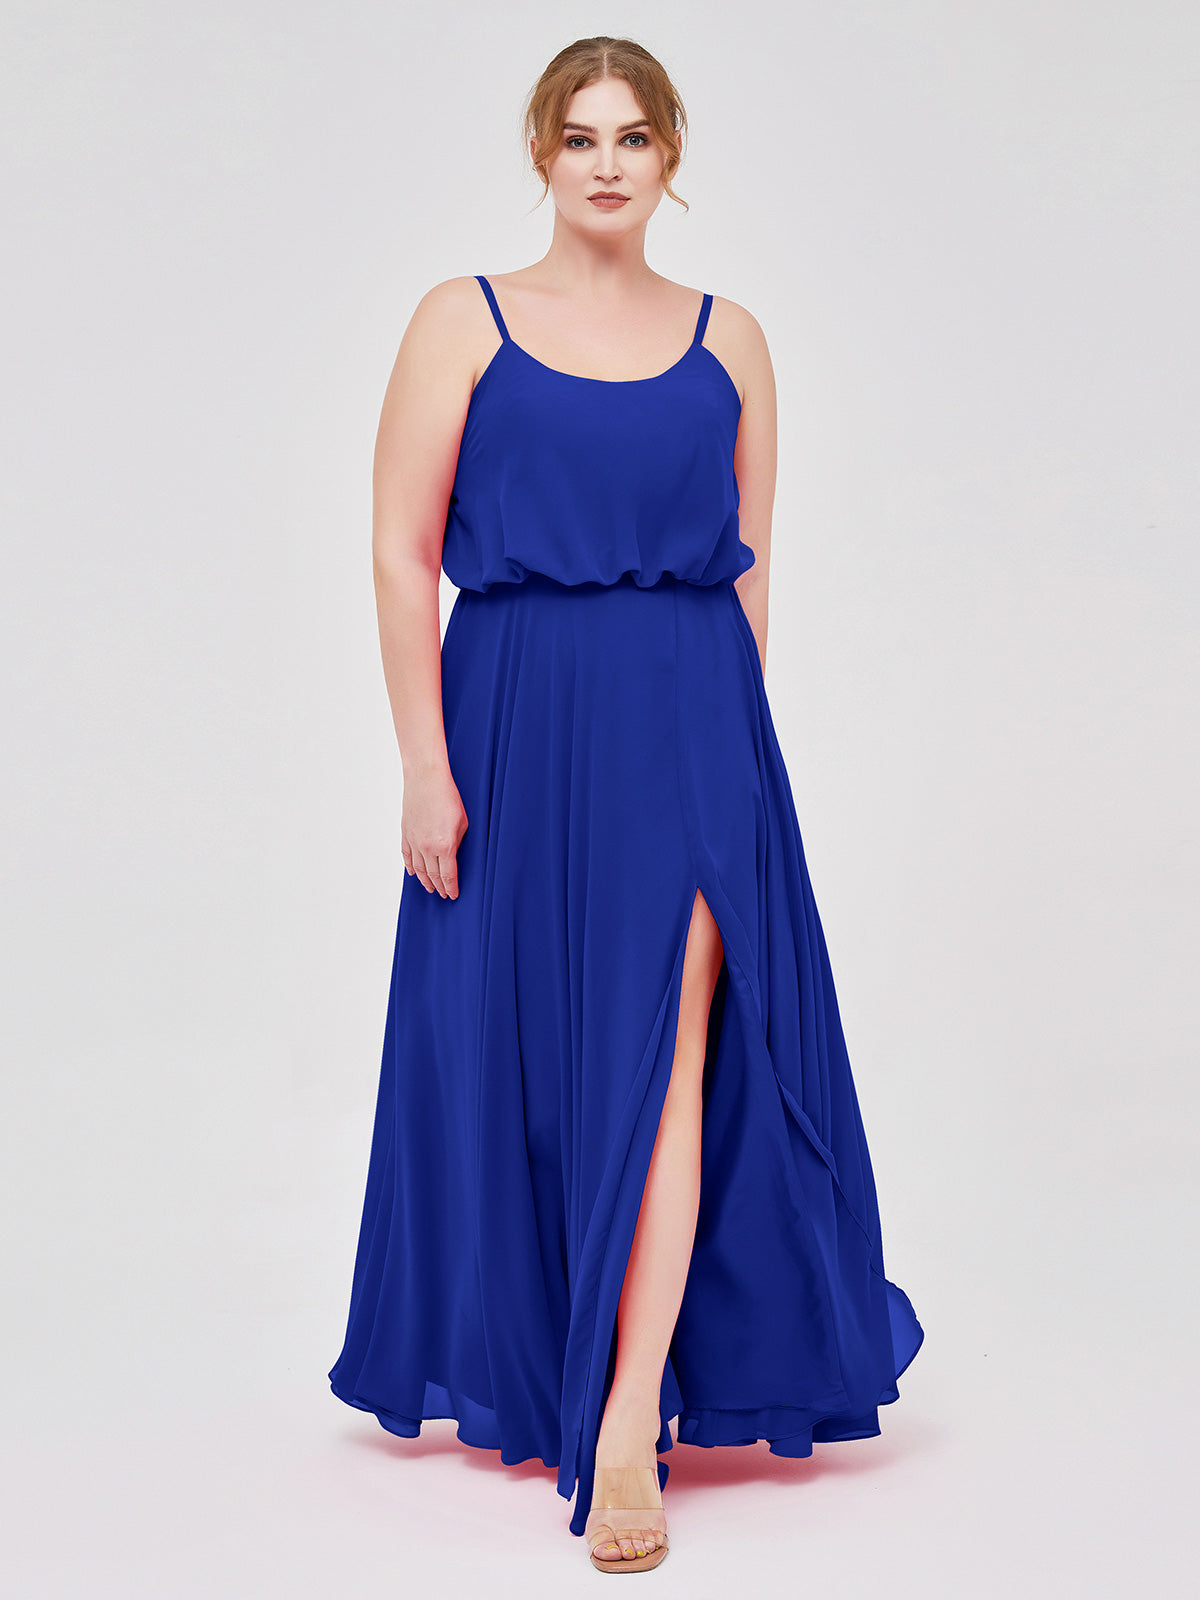 Honey Couture POLLY Royal Blue Glitter Shimmer Strapless Ballgown Form